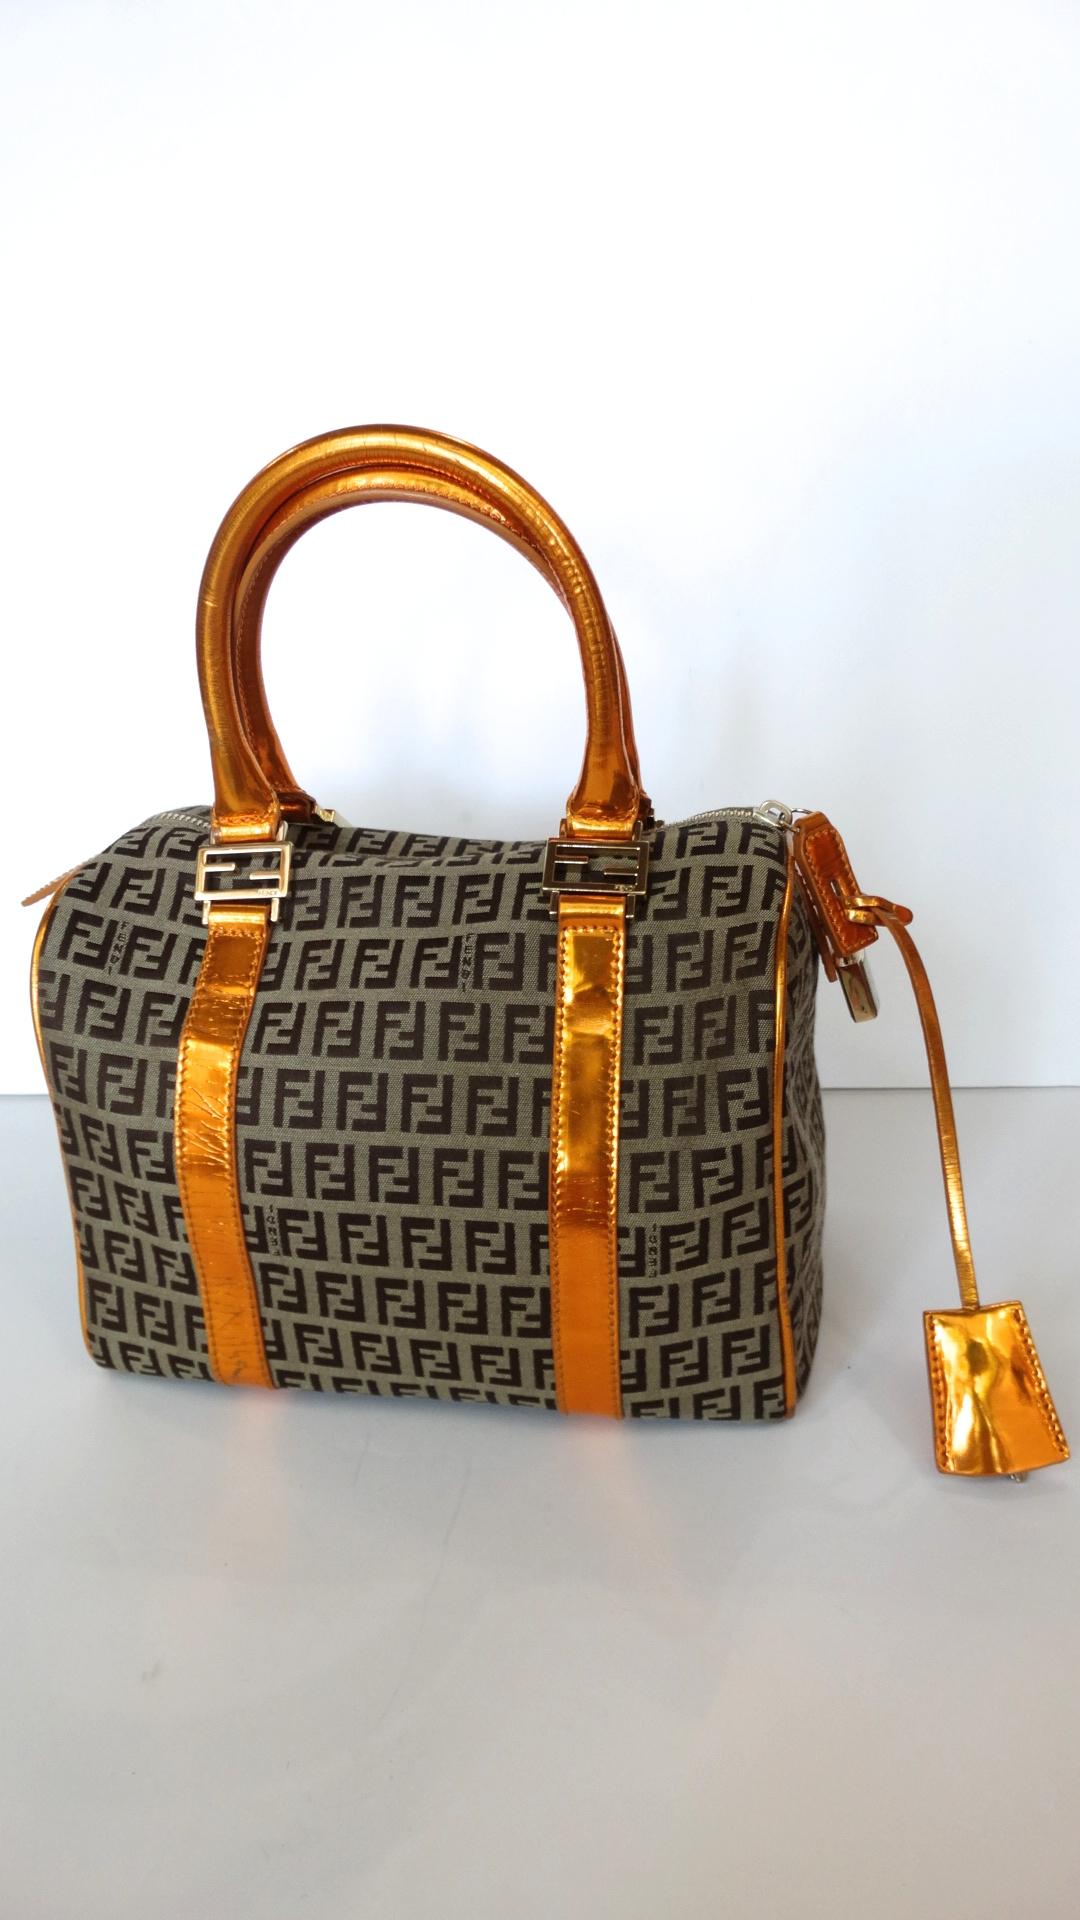 Fendi Zucca print is back! Rock the trend with our amazing Fendi Forever Zucca printed bag with orange metallic leather trim! Classic tan and brown Zucca print contrasted with glossy orange handles and matching clochette. Comes with original silver